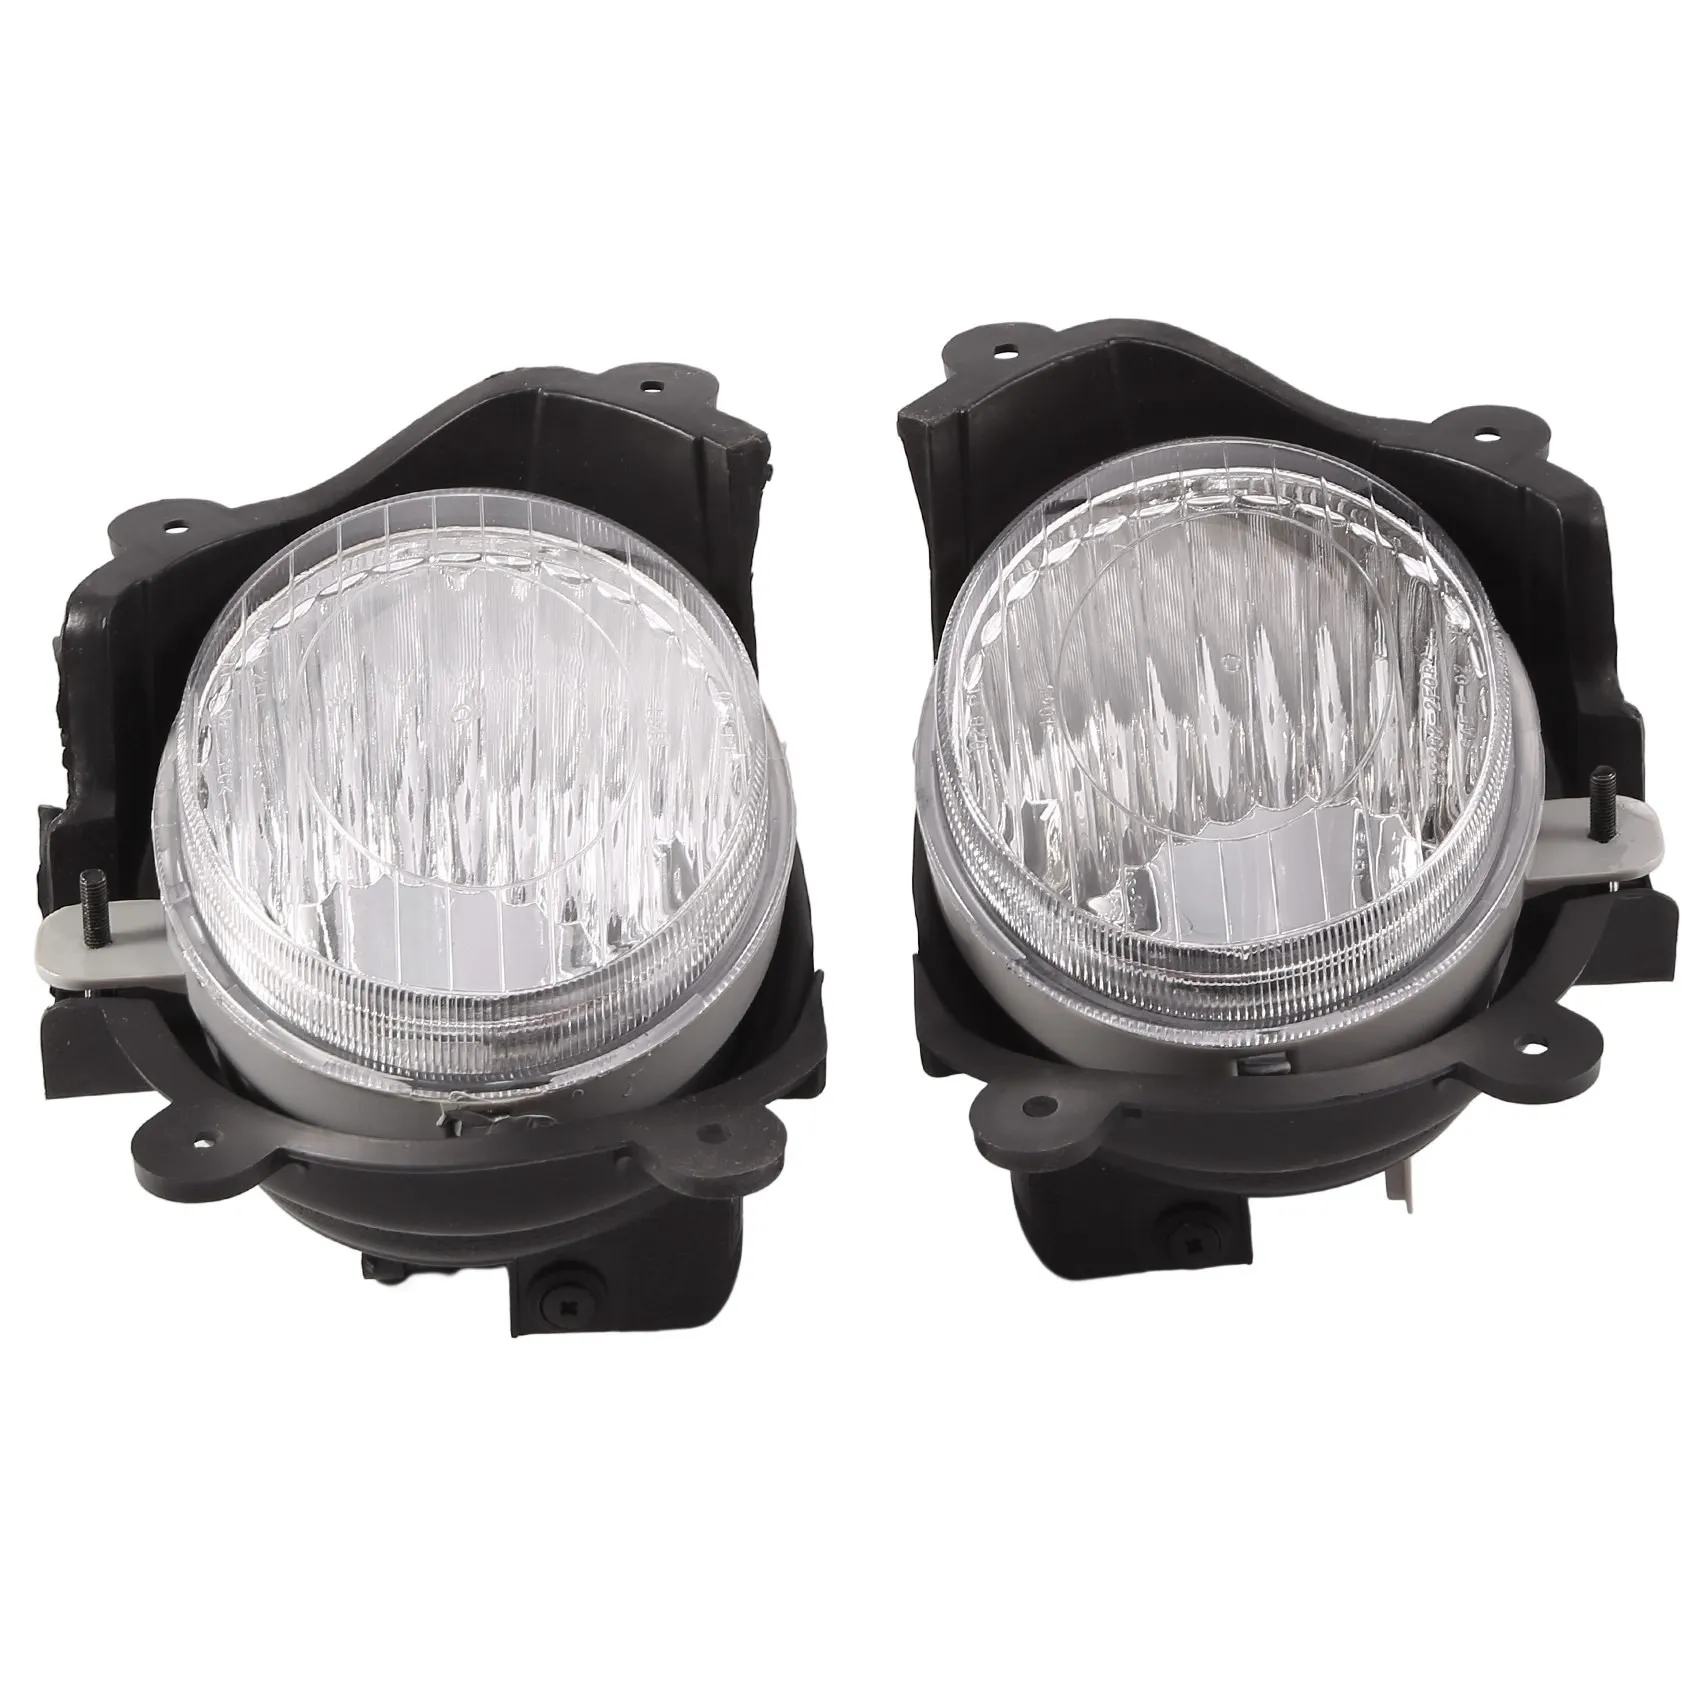 

1Pair Car Front Bumper Fog Lights Assembly Driving Lamp Foglight Grille Signal Lamp with Bulb for Kia Cerato 2005 2006